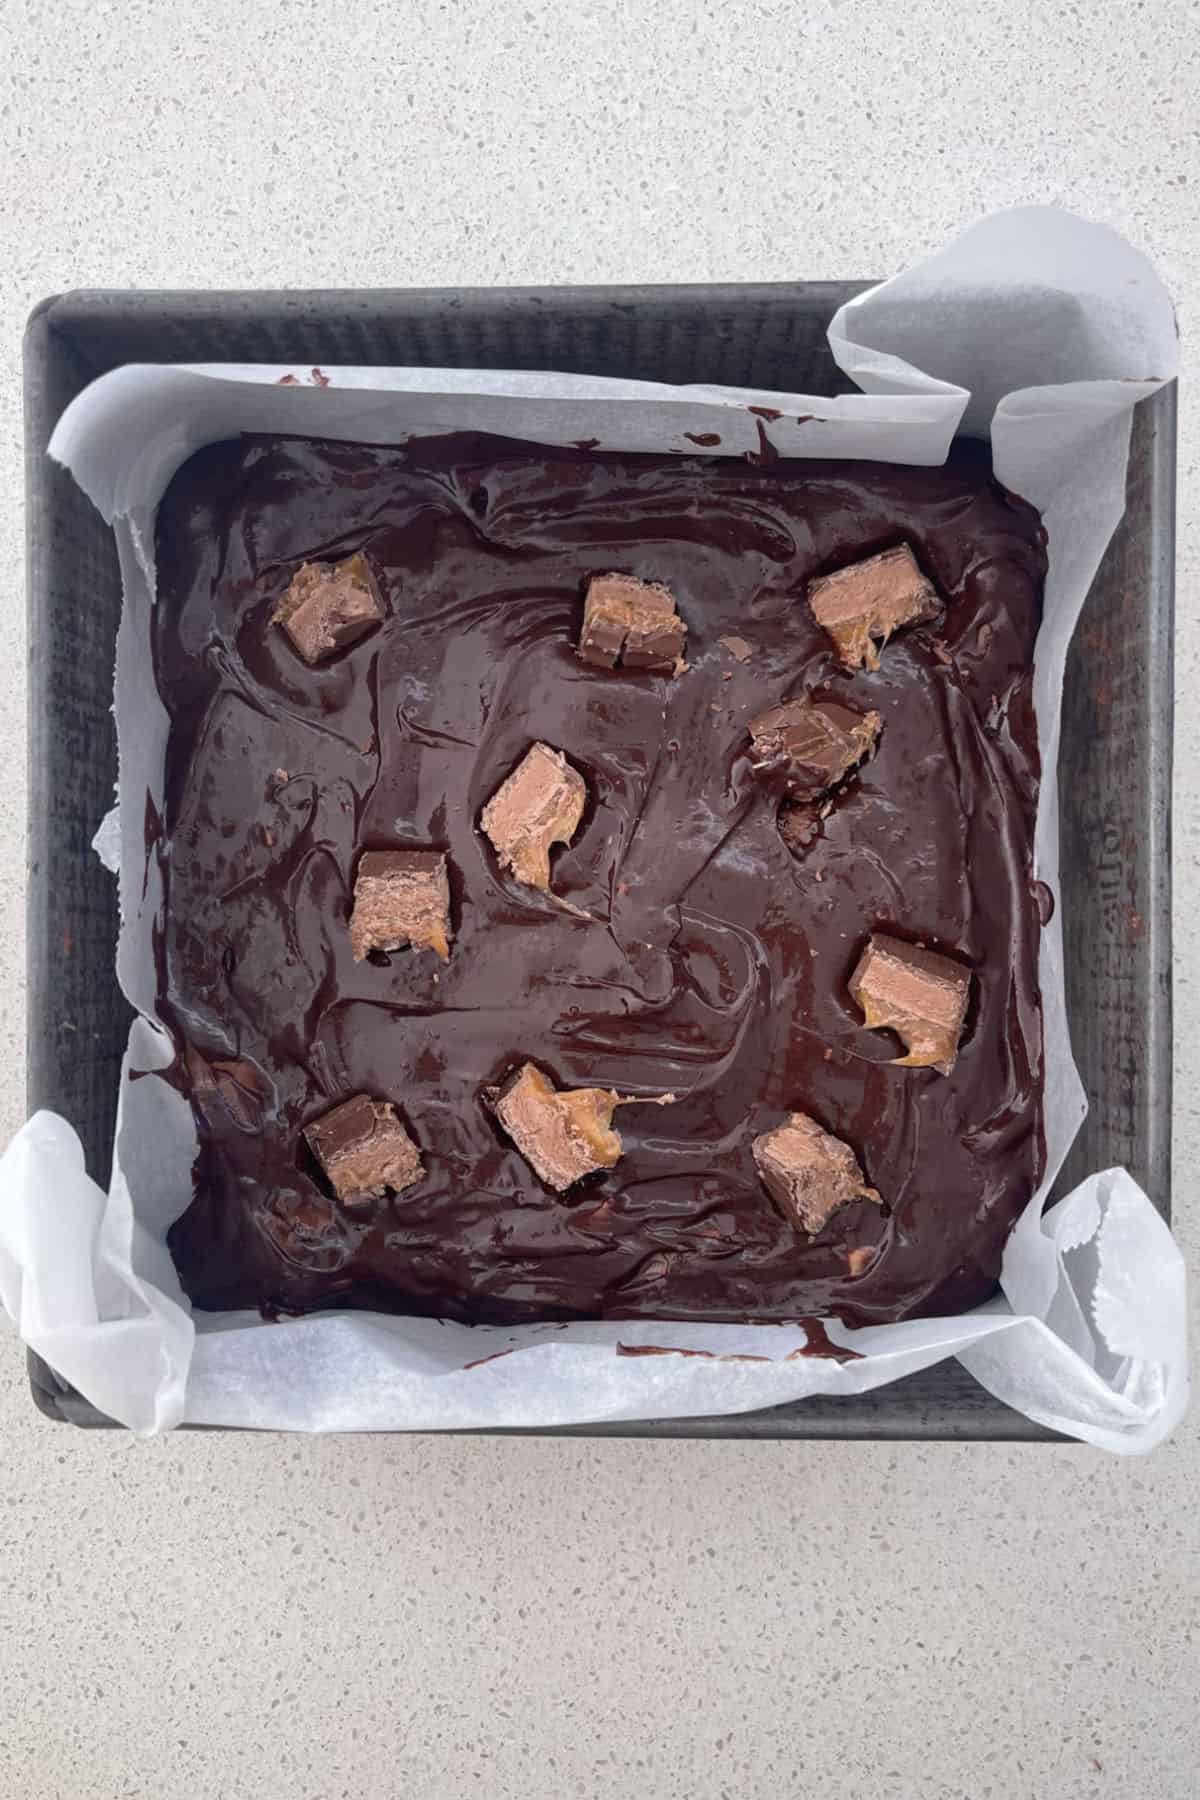 Mars Bar Brownies in a baking dish ready to go into the oven.